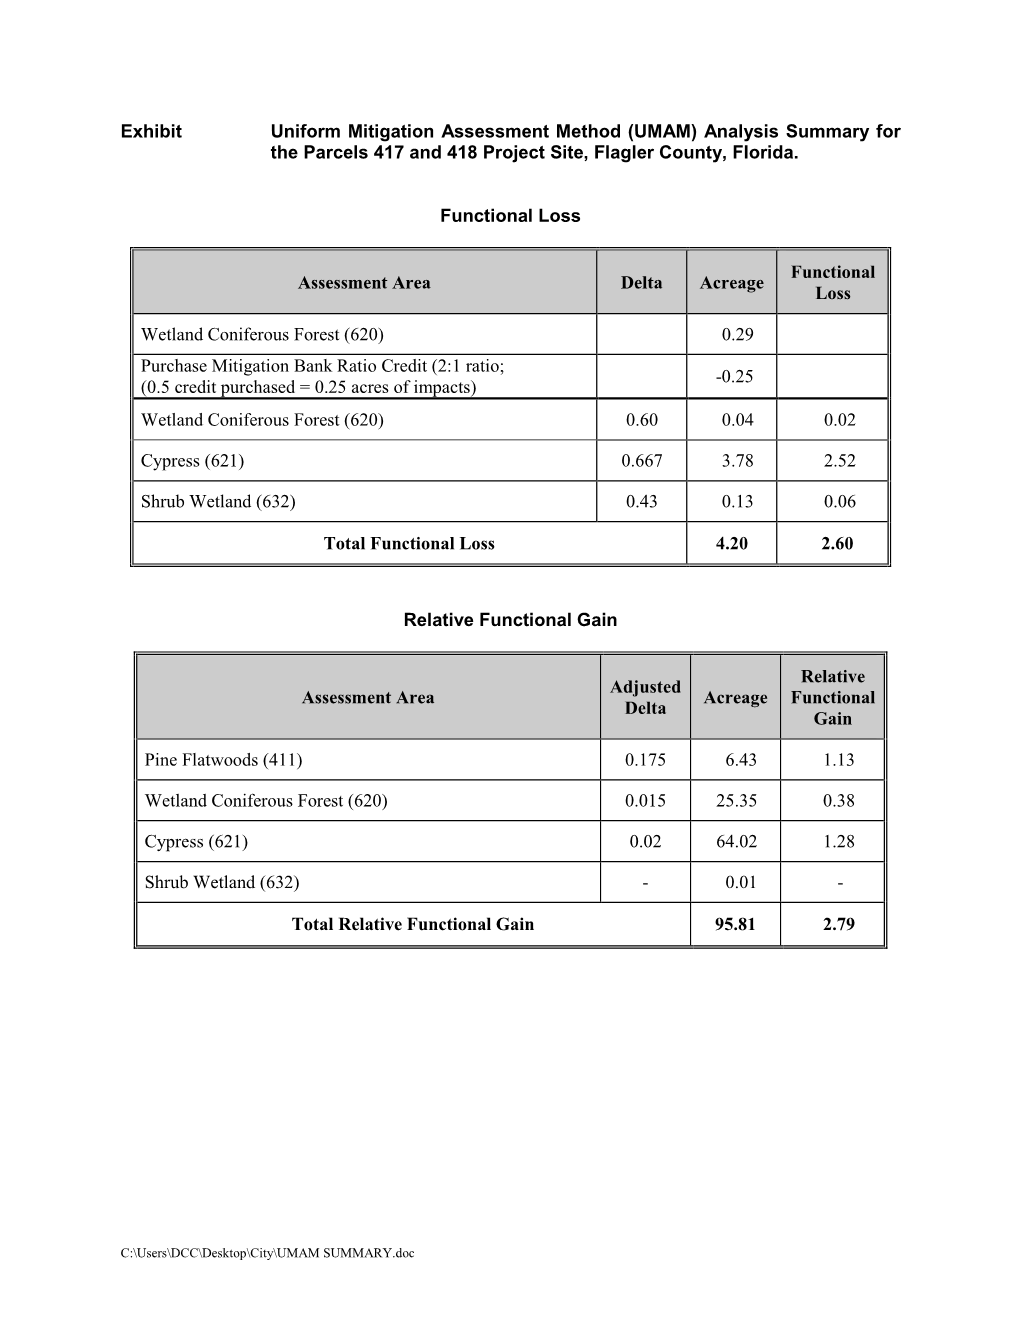 UMAM) Analysis Summary for the Parcels 417 and 418 Project Site, Flagler County, Florida